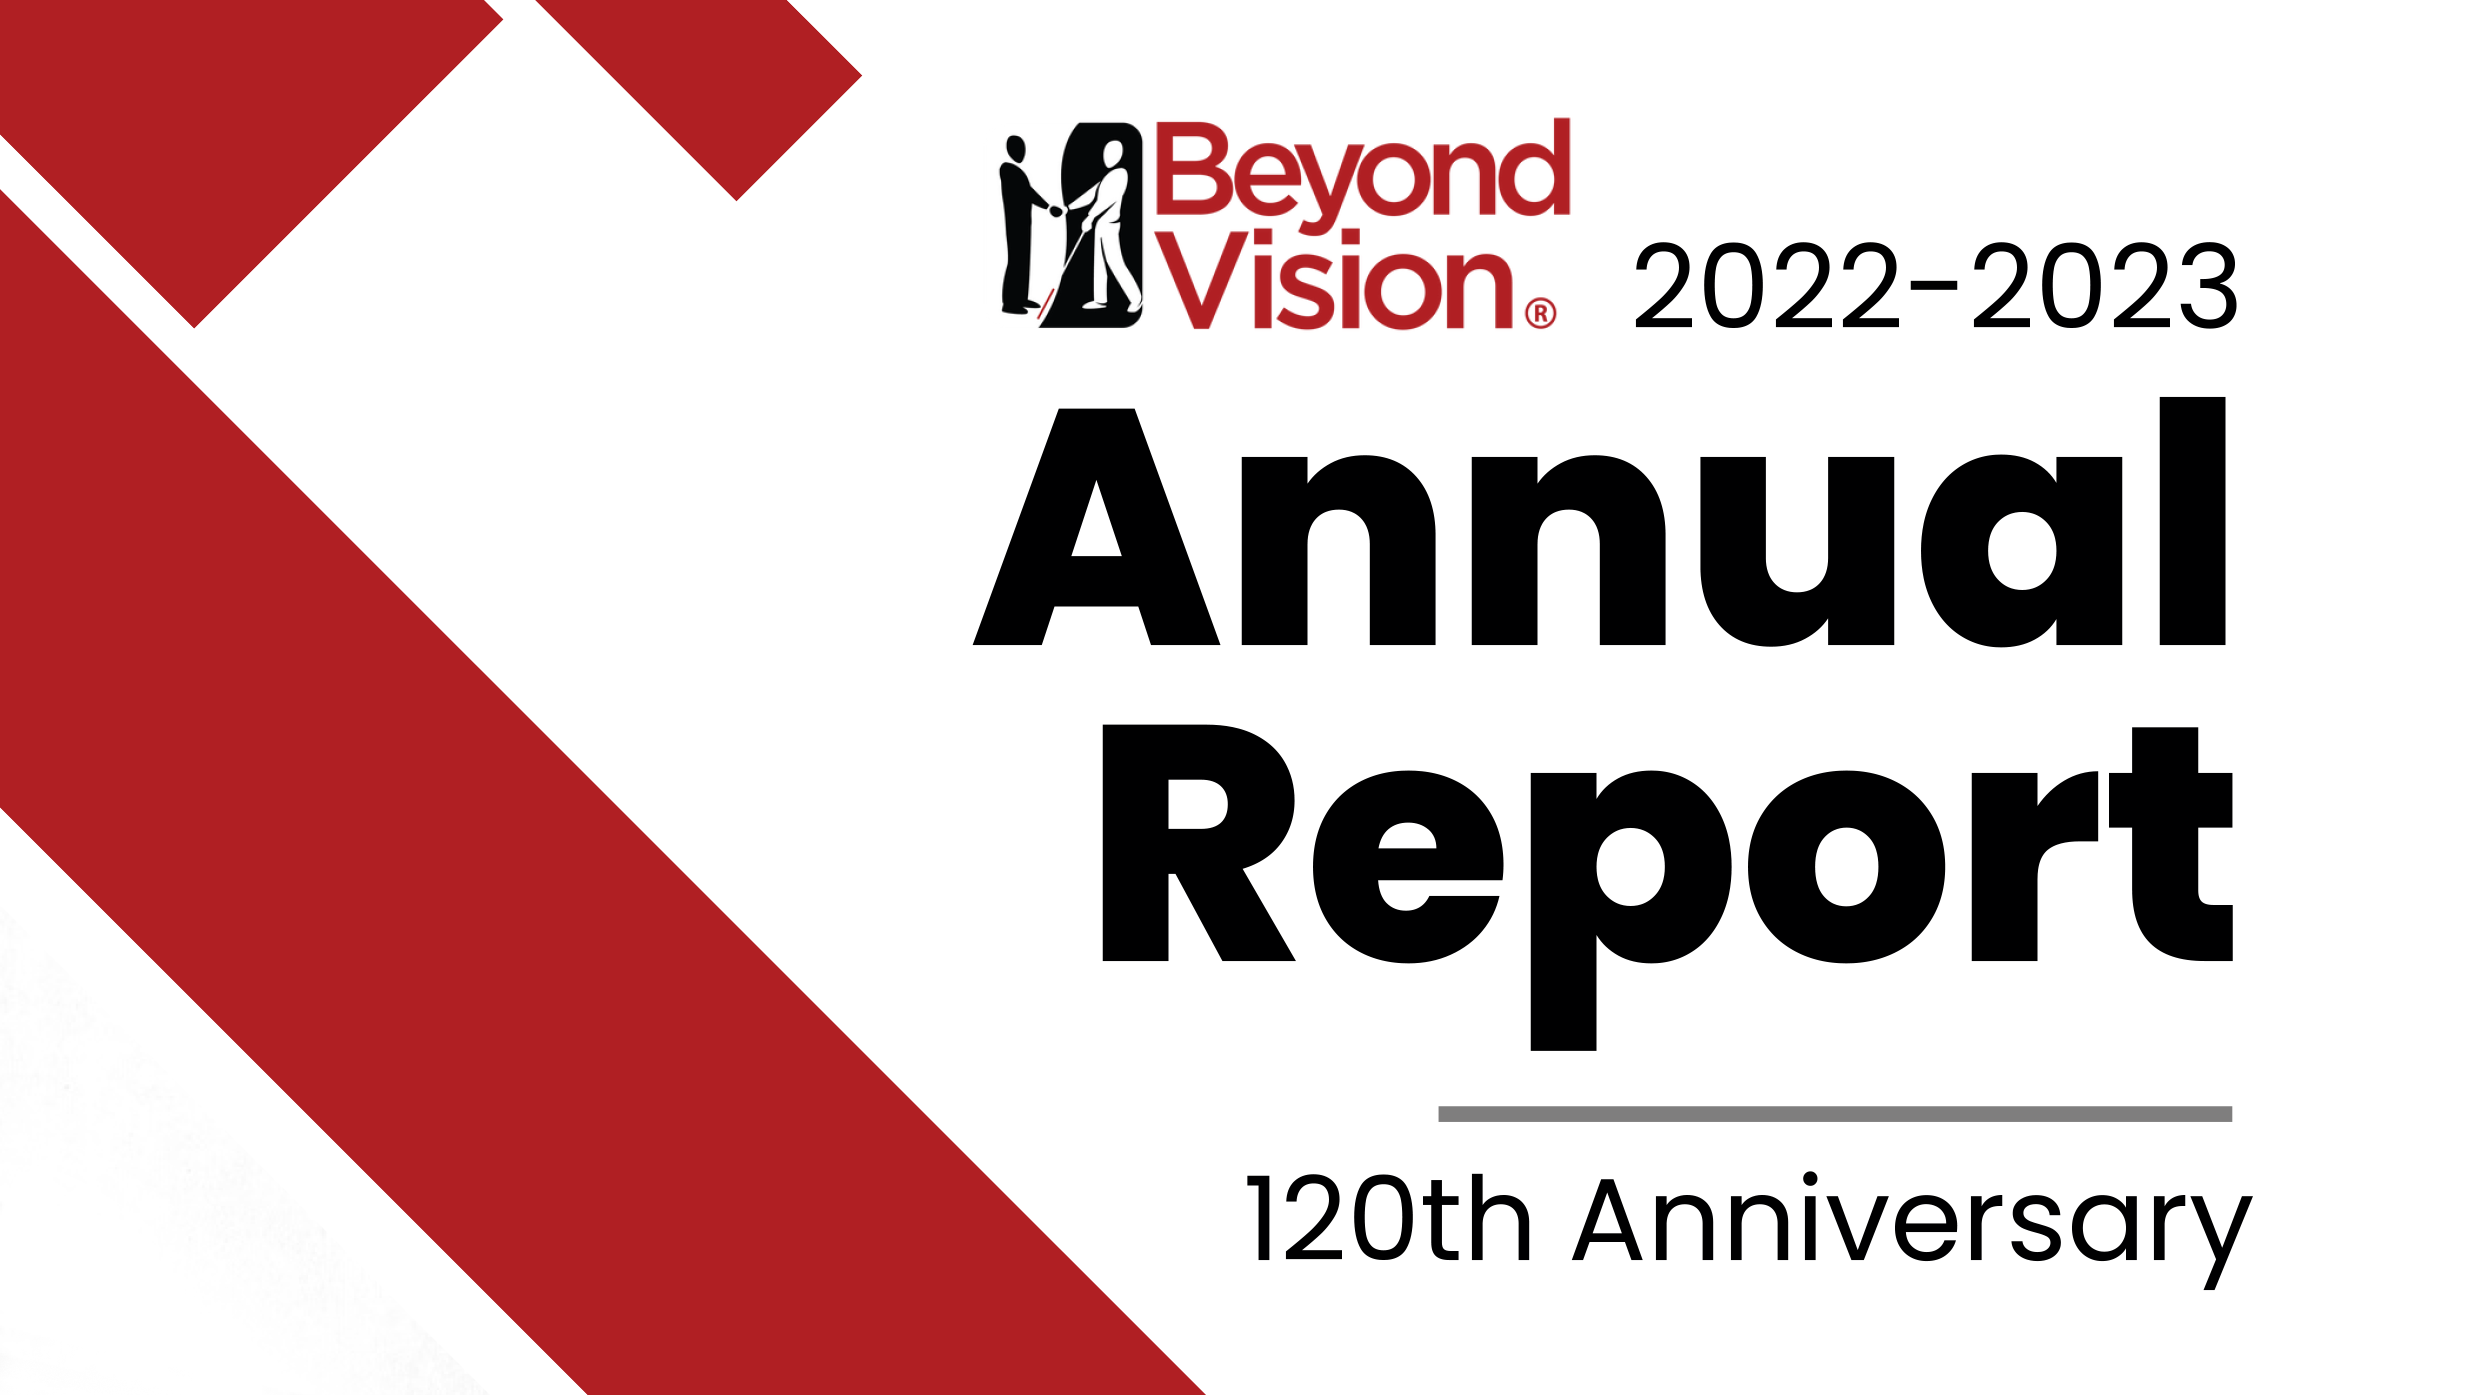 Beyond Vision 2022-2023 Annual Report 120th Anniversary